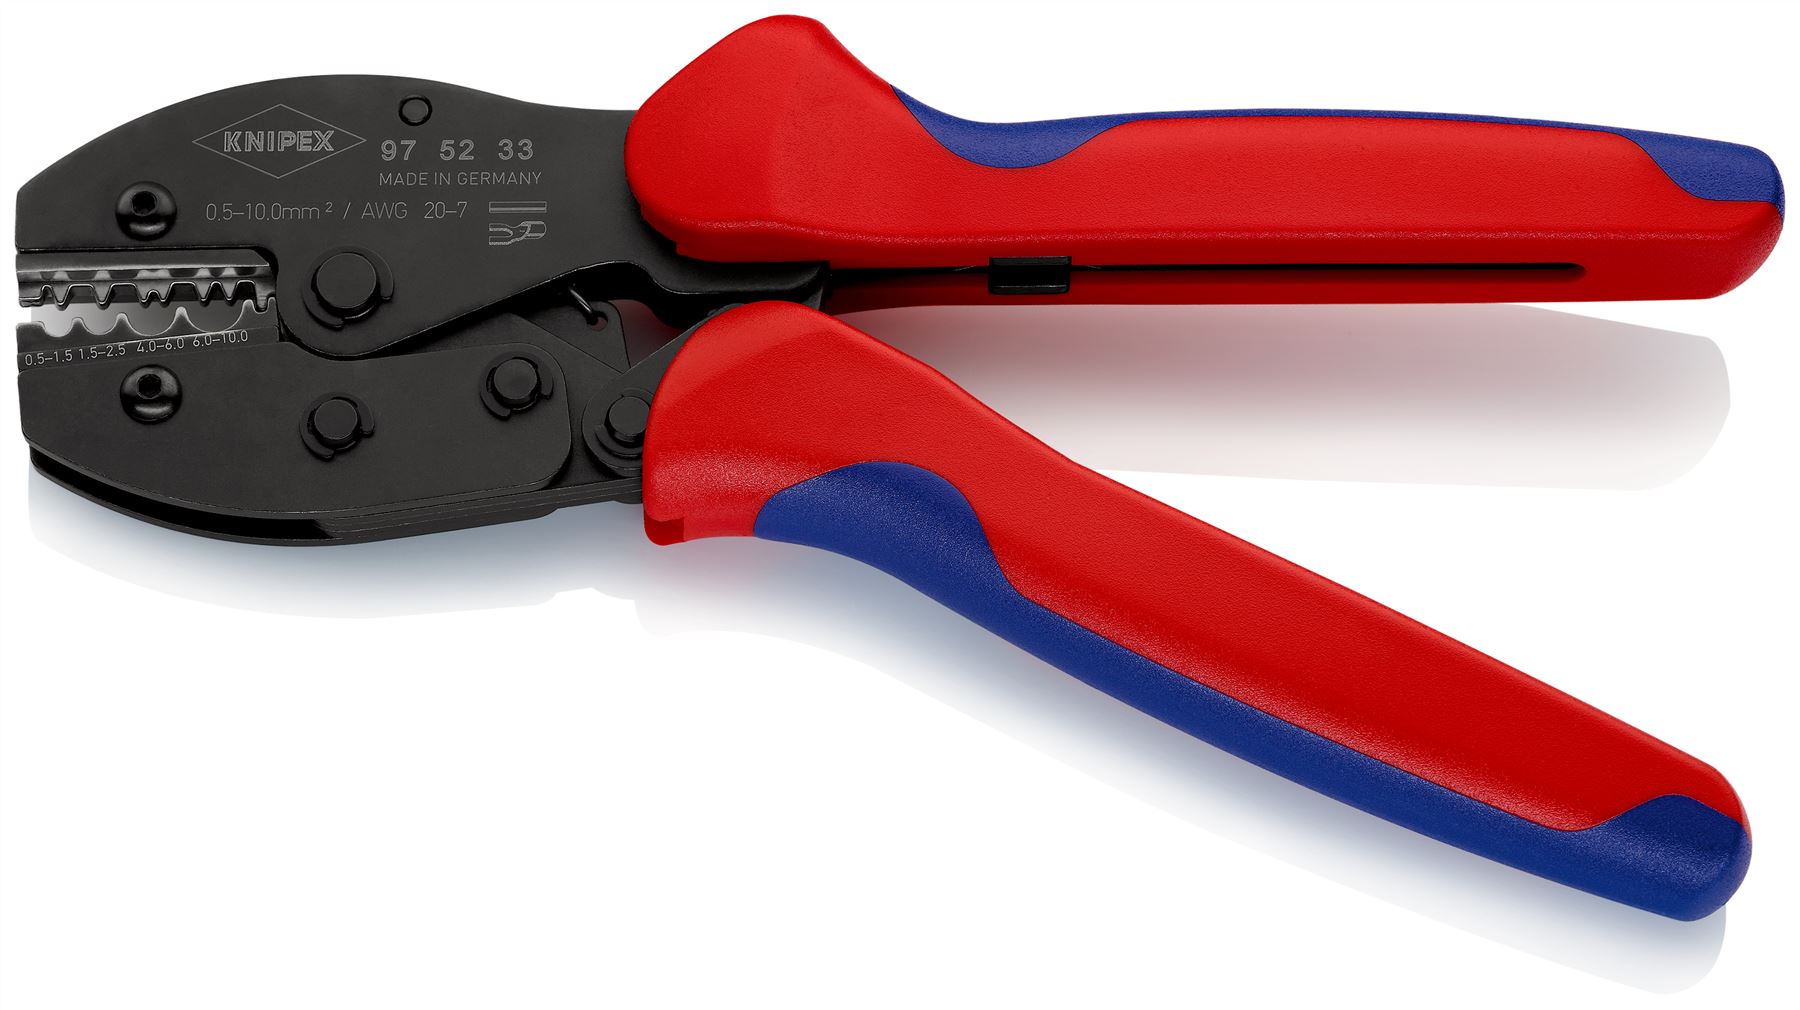 KNIPEX PreciForce Crimping Pliers for Non Insulated Terminals 0.5-10mm² 220mm 97 52 33